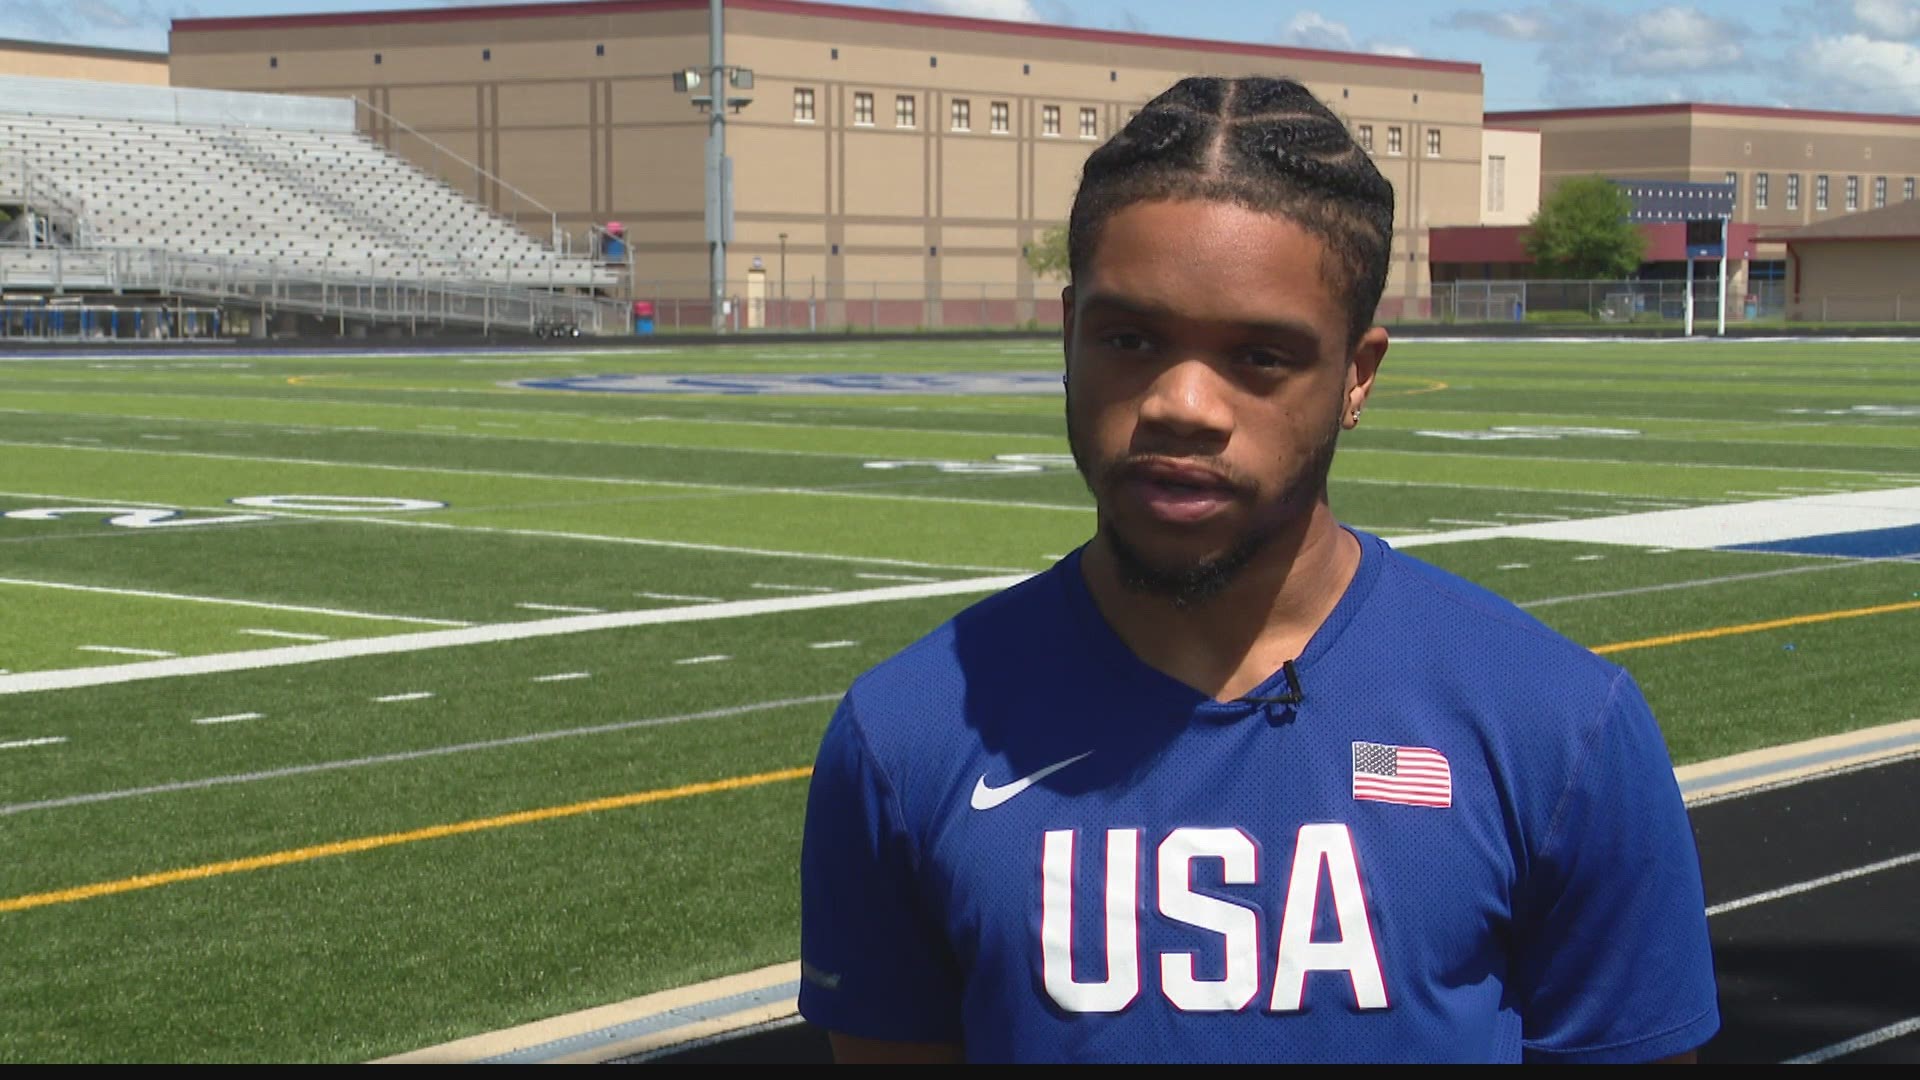 A 19-year-old from Fishers qualified for the Paralympic games last month and will compete in the 100 and 400-meter dashes in Tokyo.